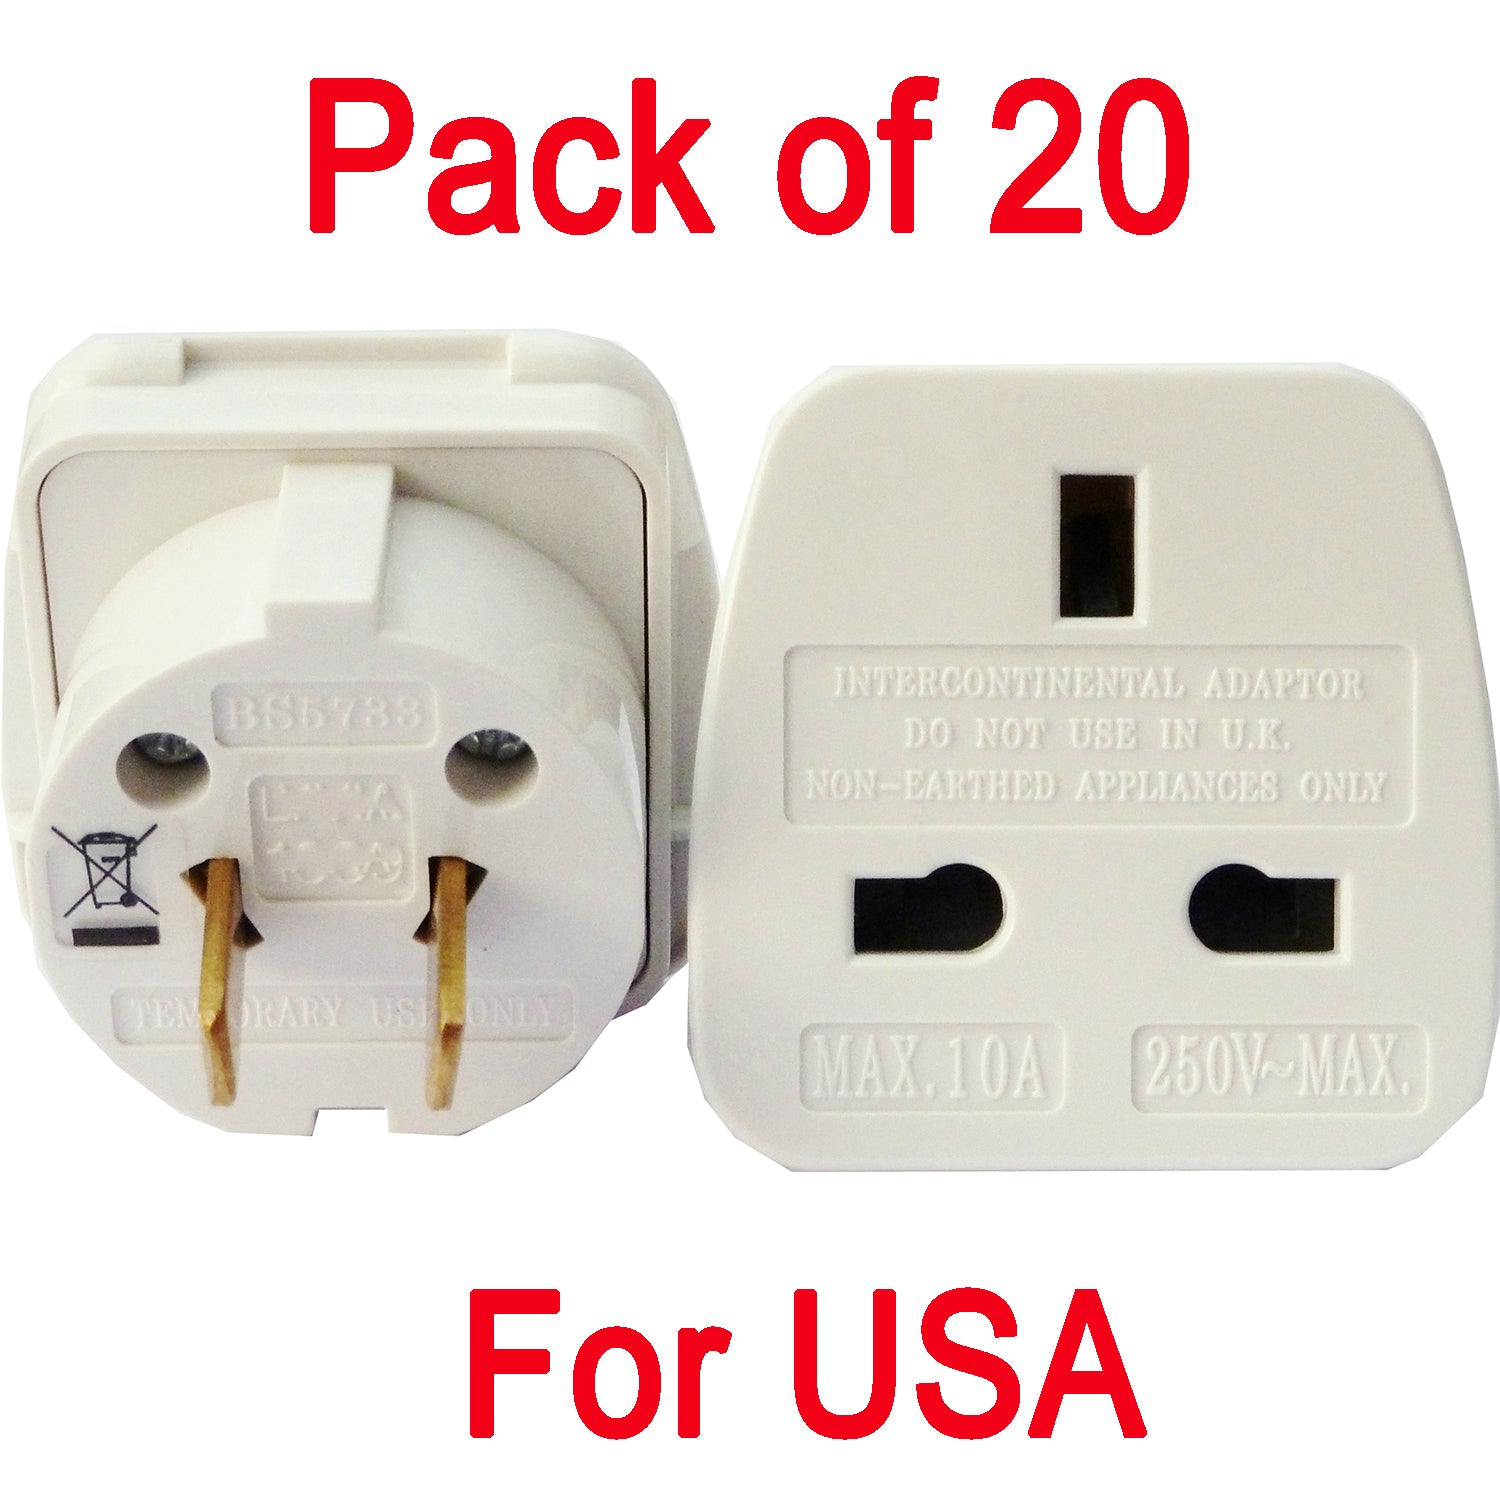 Discount travel adapter plugs for usa